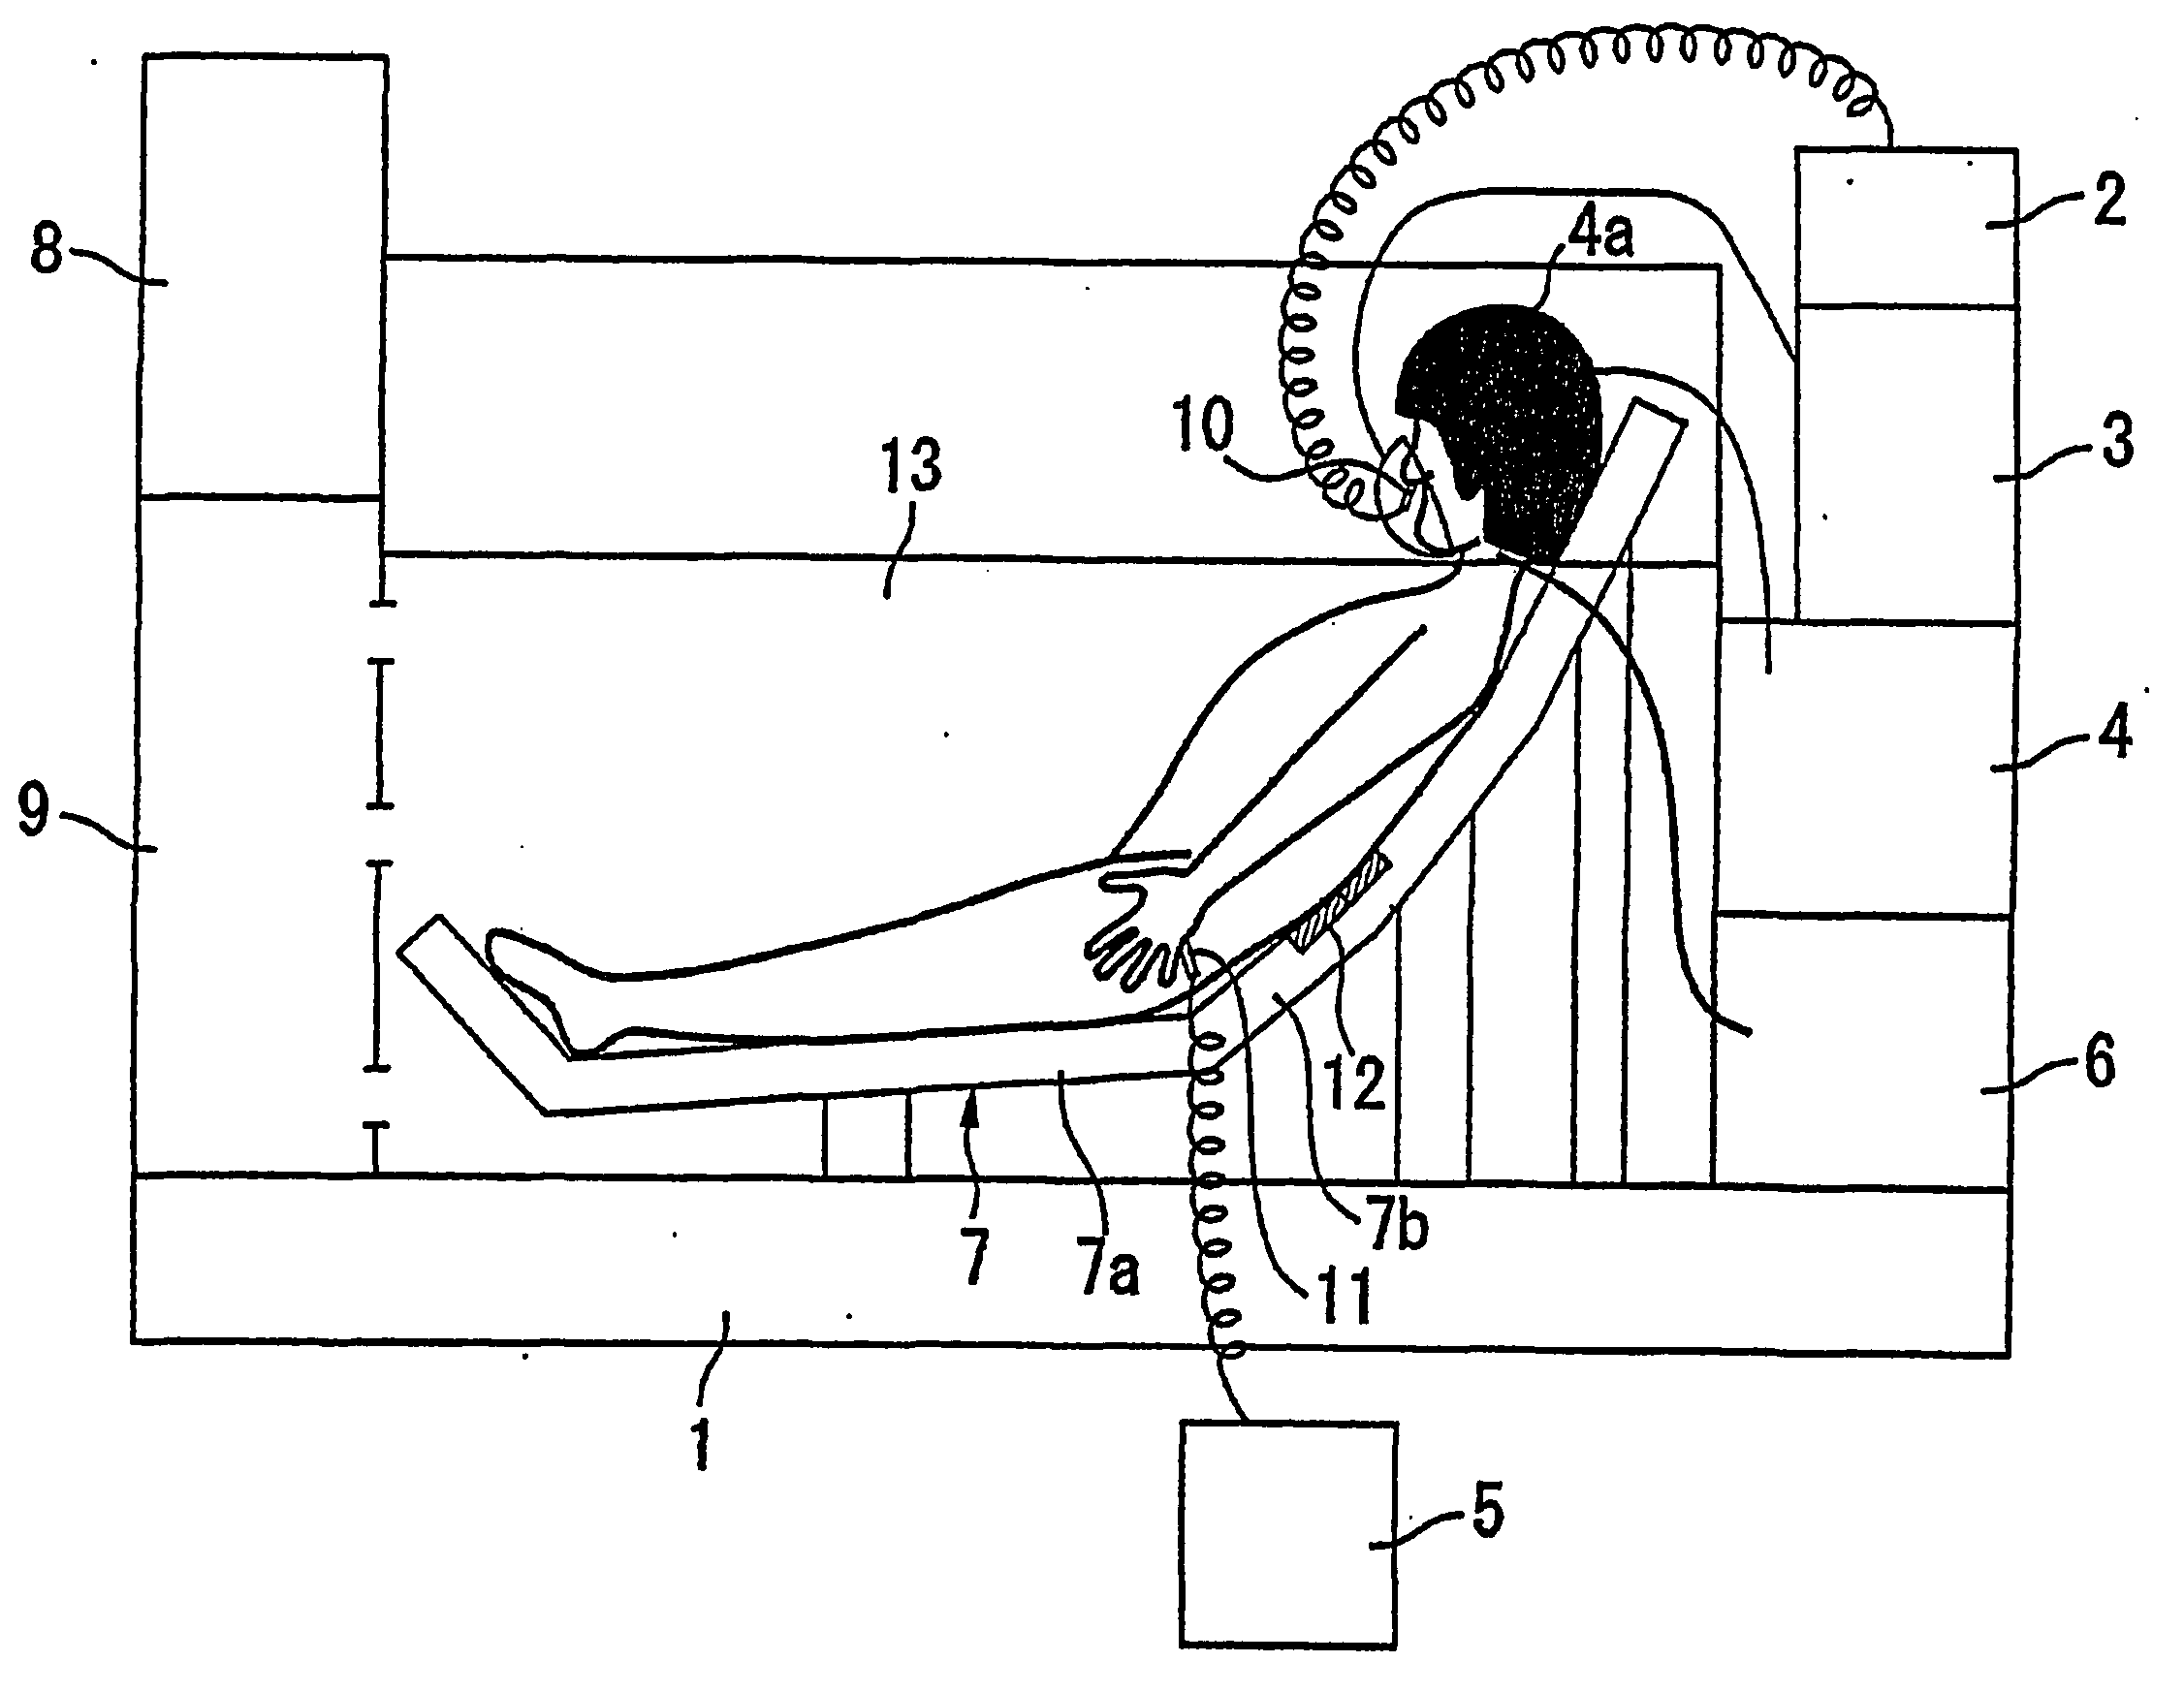 Whole-body thermotherapy method and device